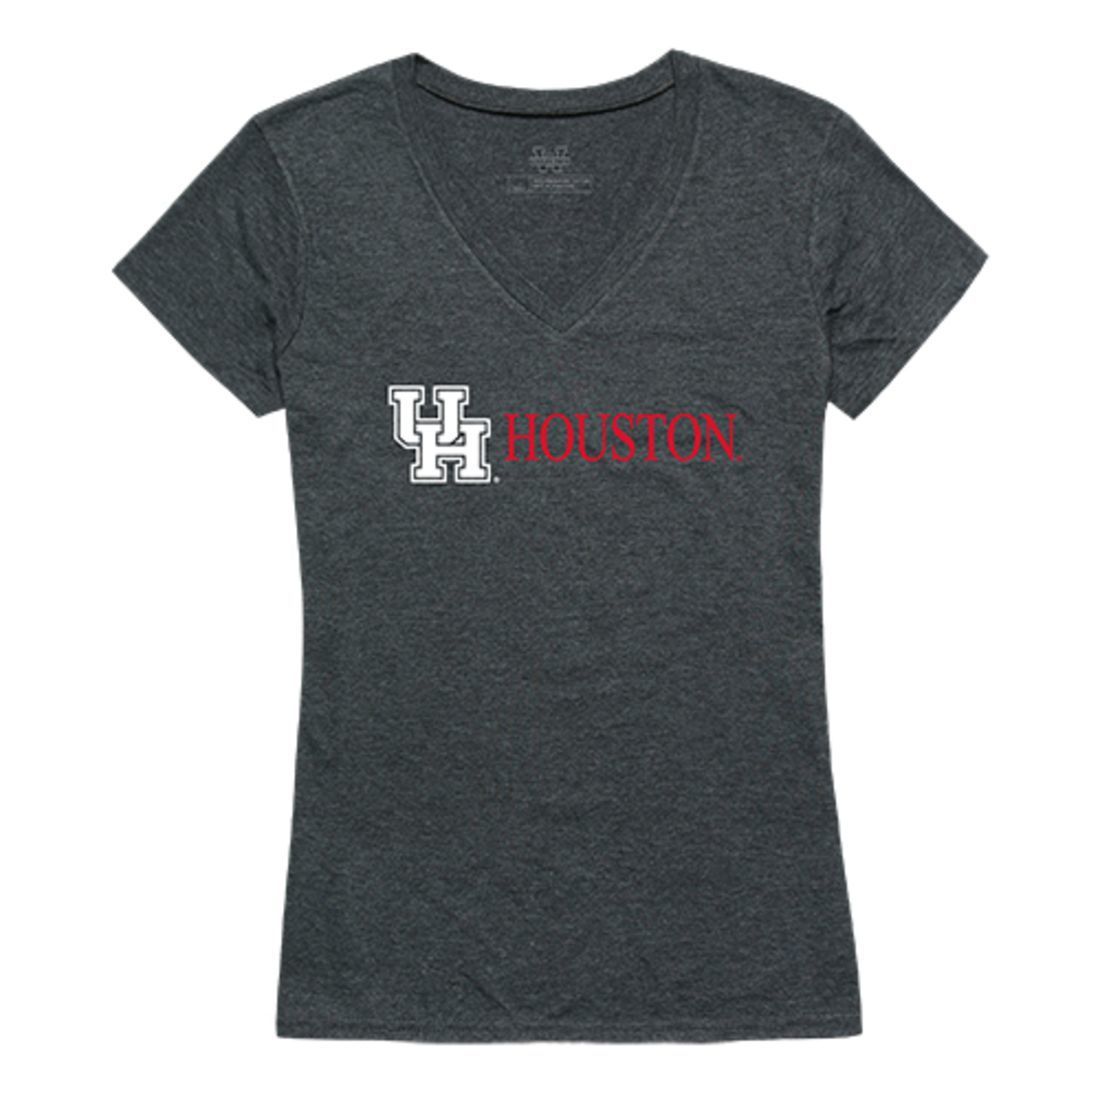 University of Houston UH Coyotes Womens Institutional Tee T-Shirt Heather Charcoal-Campus-Wardrobe